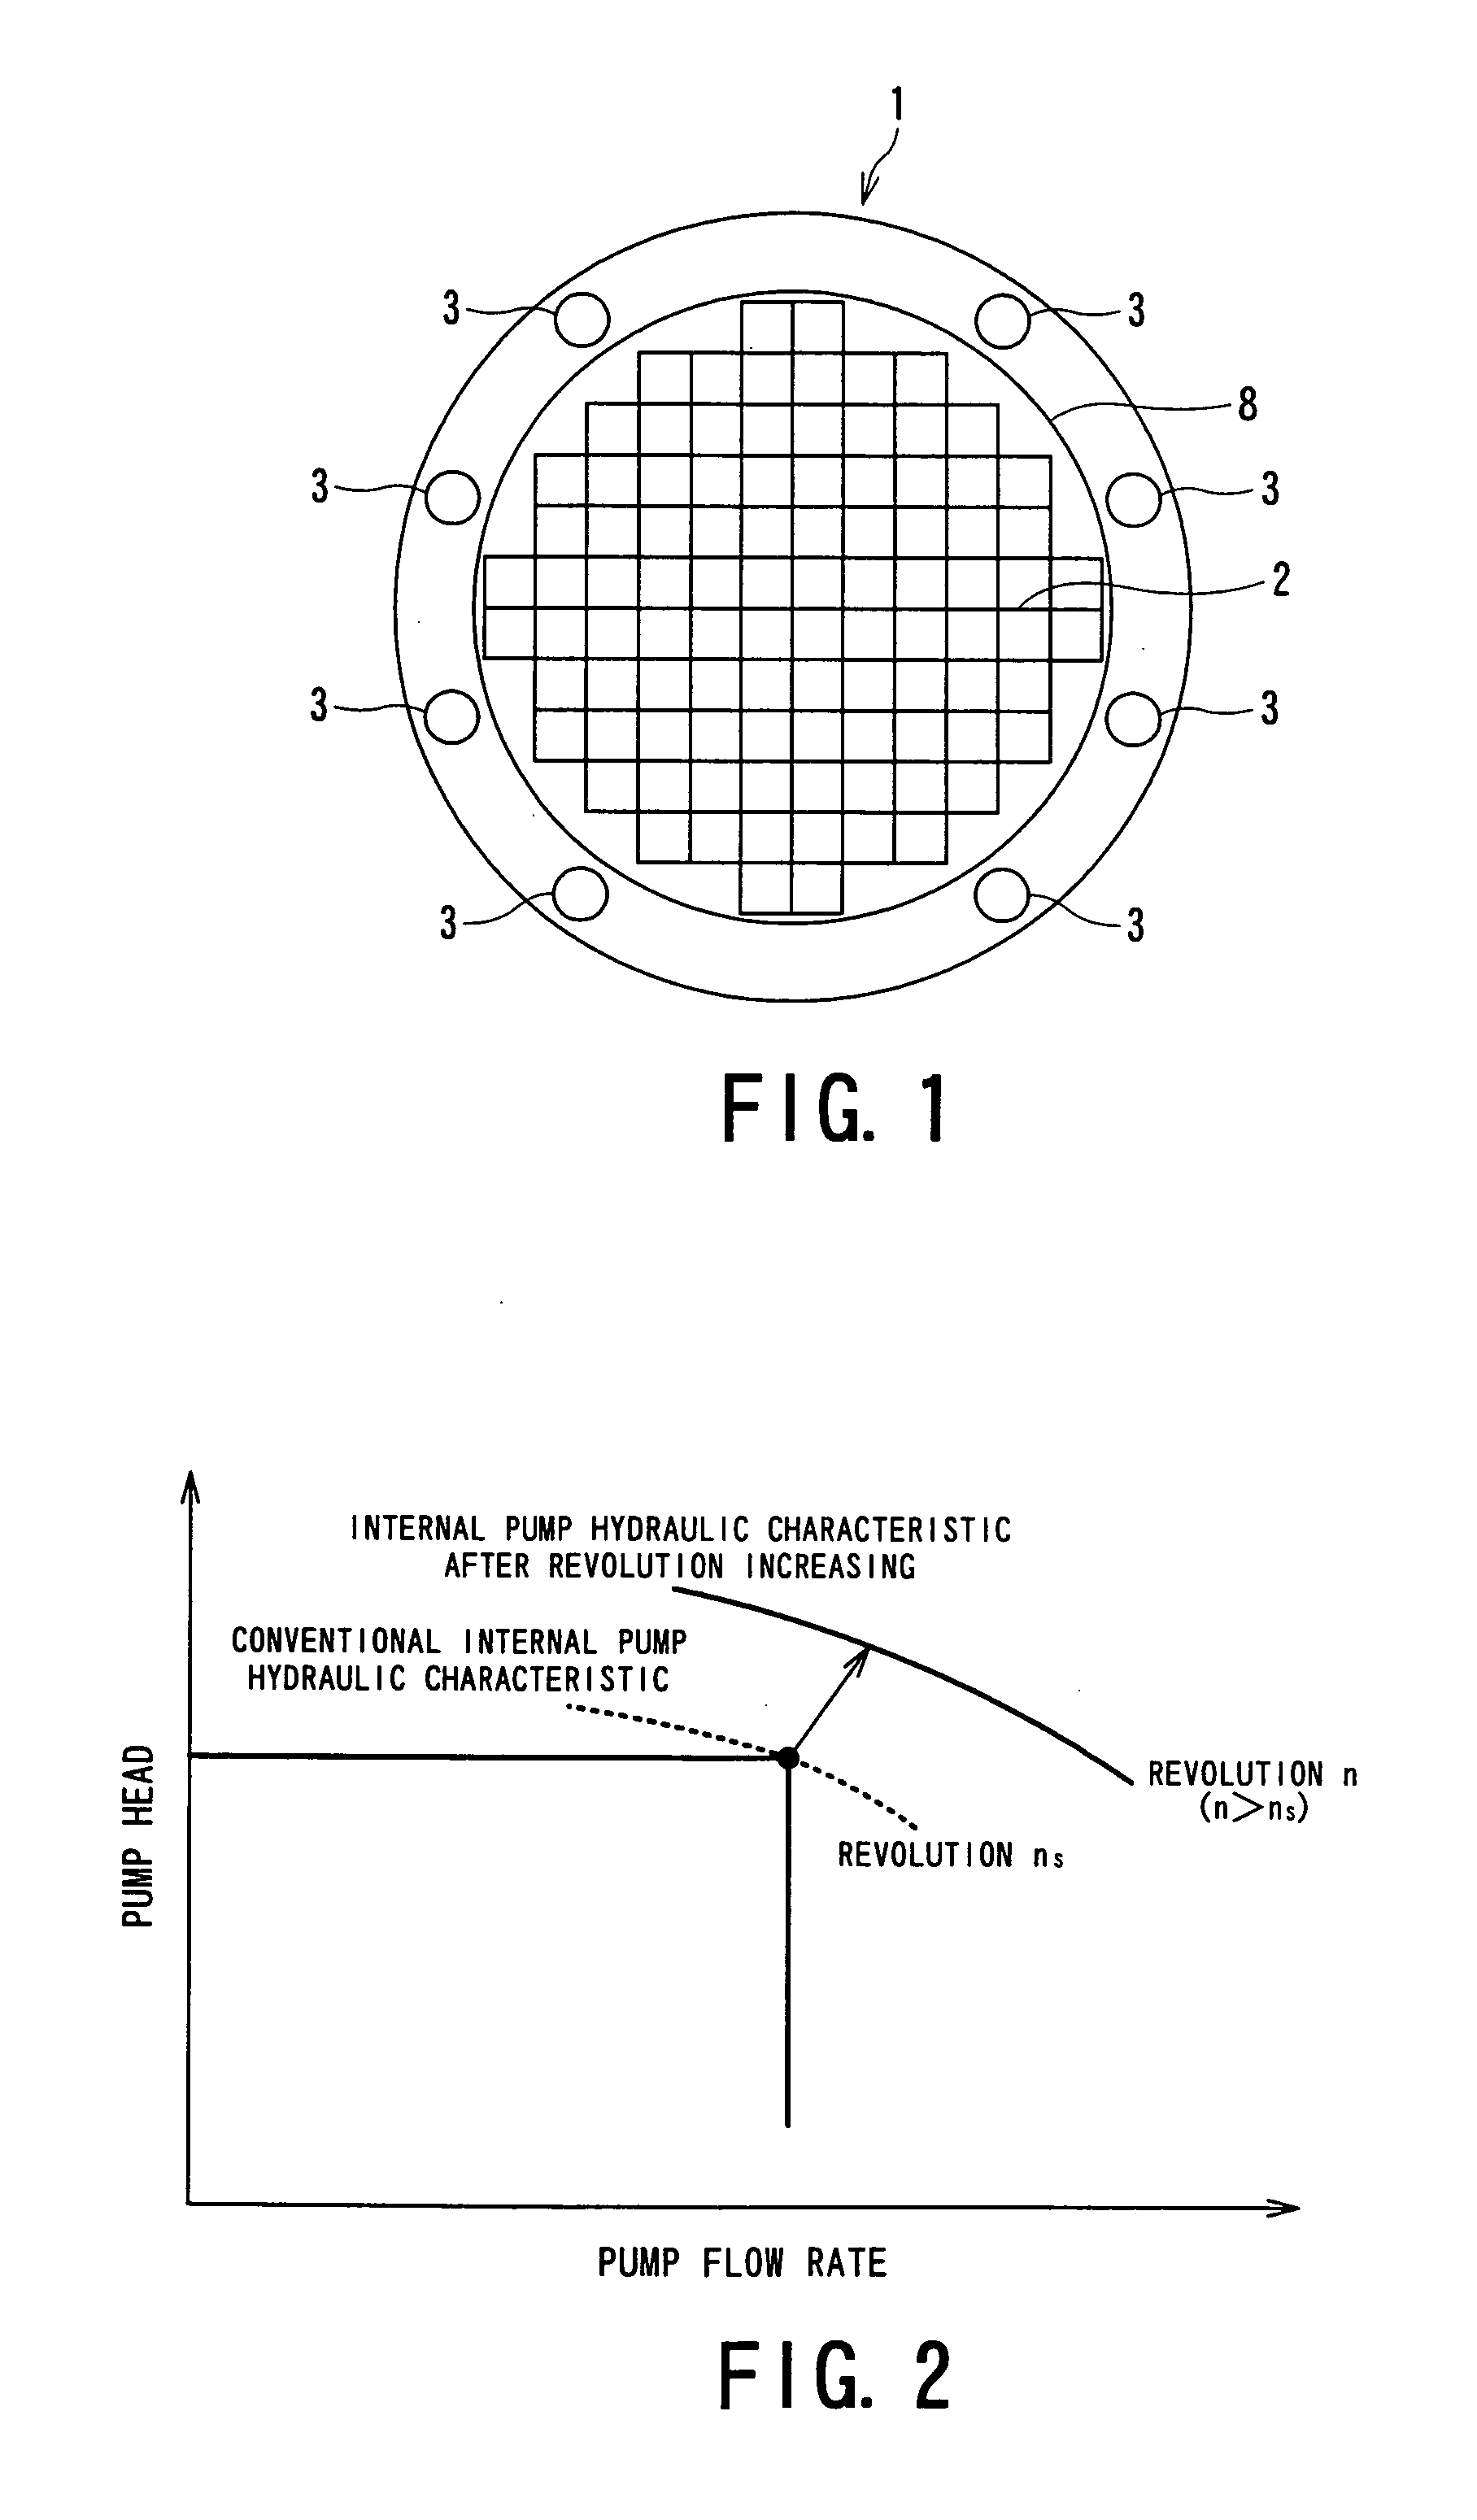 Coolant recirculation equipment for nuclear reactor